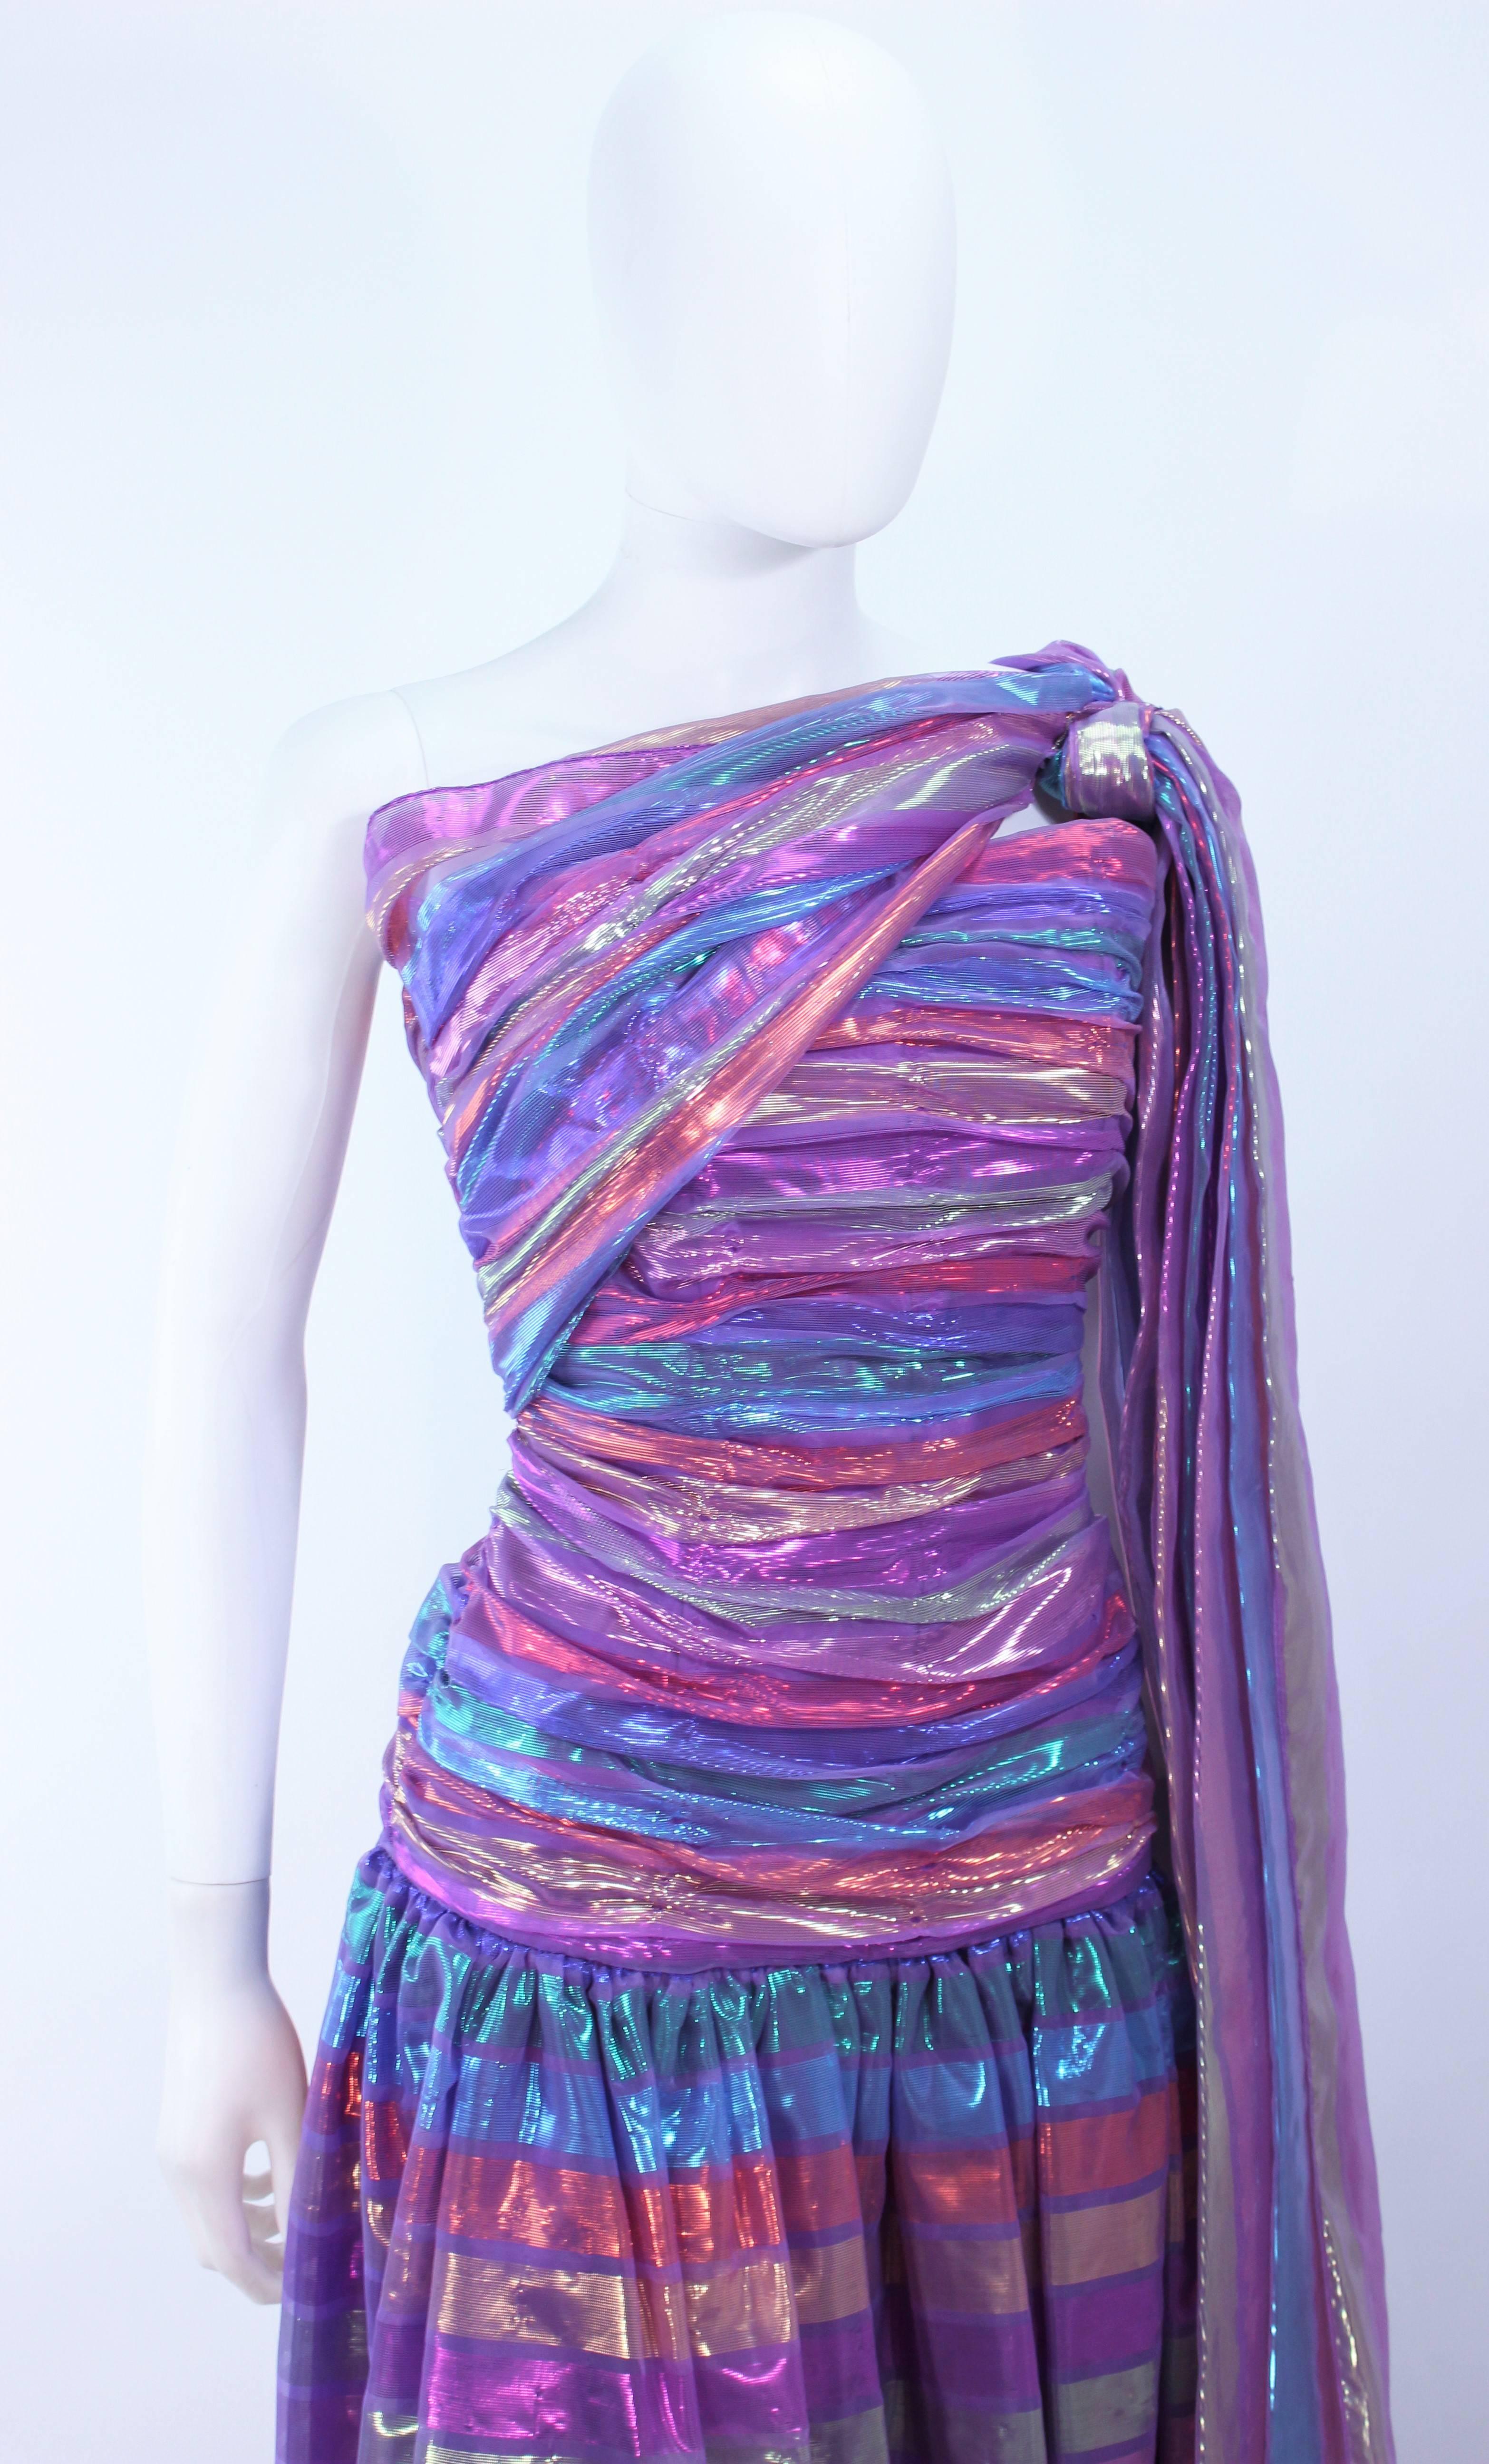 Women's VICTOR COSTA 1970's Iridescent Rainbow Lame Gown with Drape Size 6 8